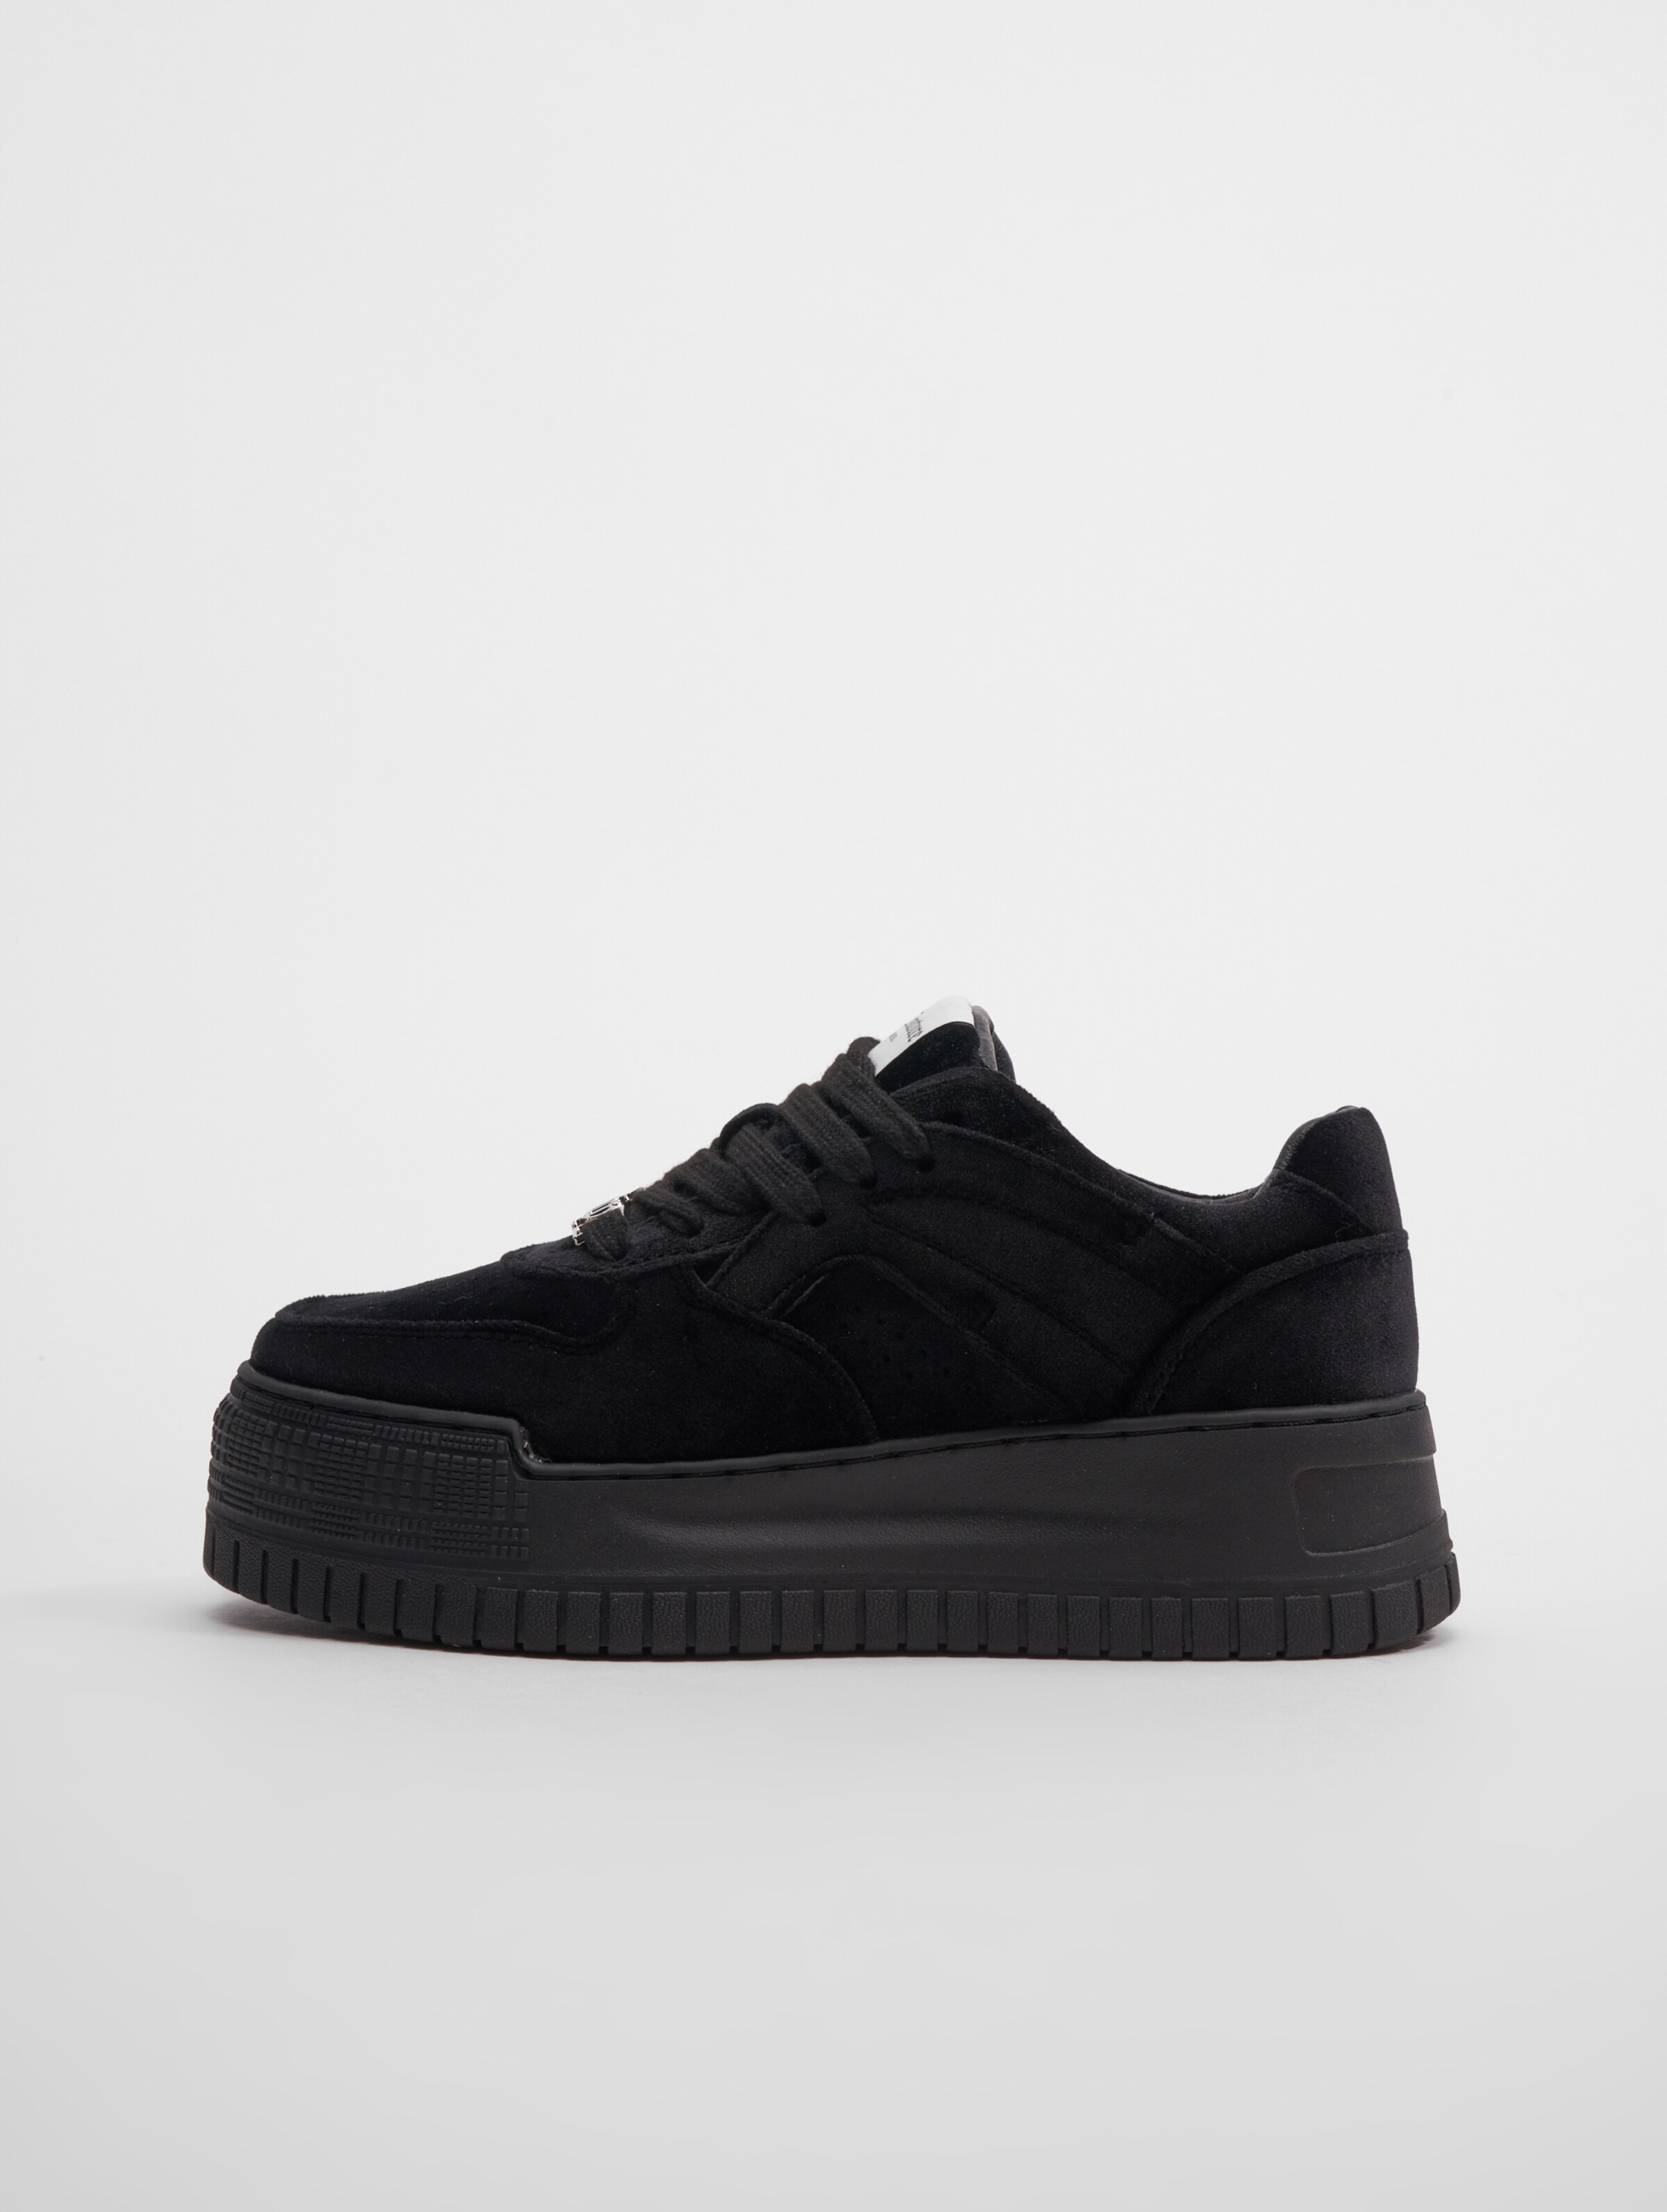 Buy Forever 21 Women's Black Casual Sneakers for Women at Best Price @ Tata  CLiQ